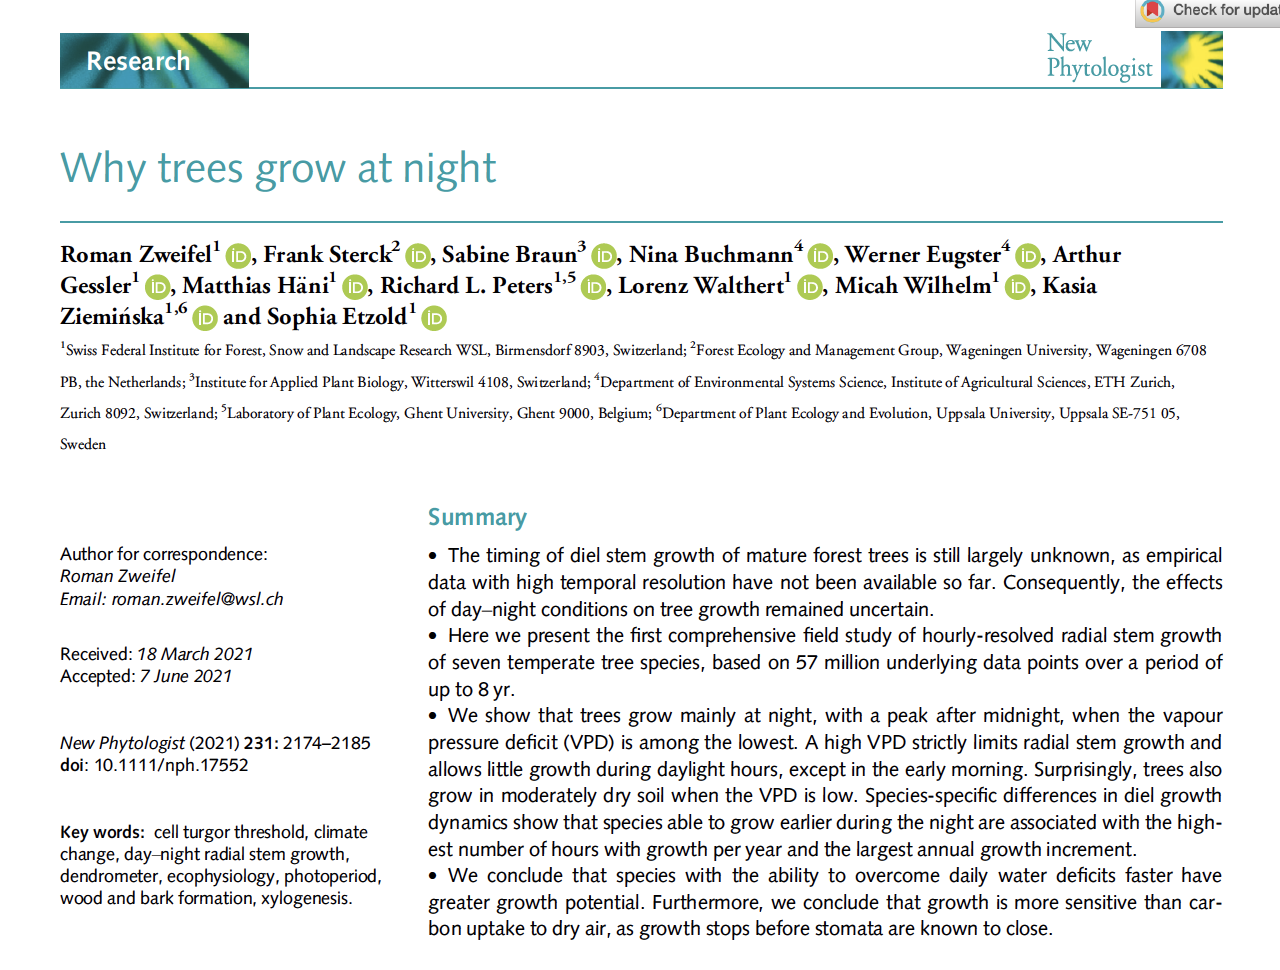 Why trees grow at night